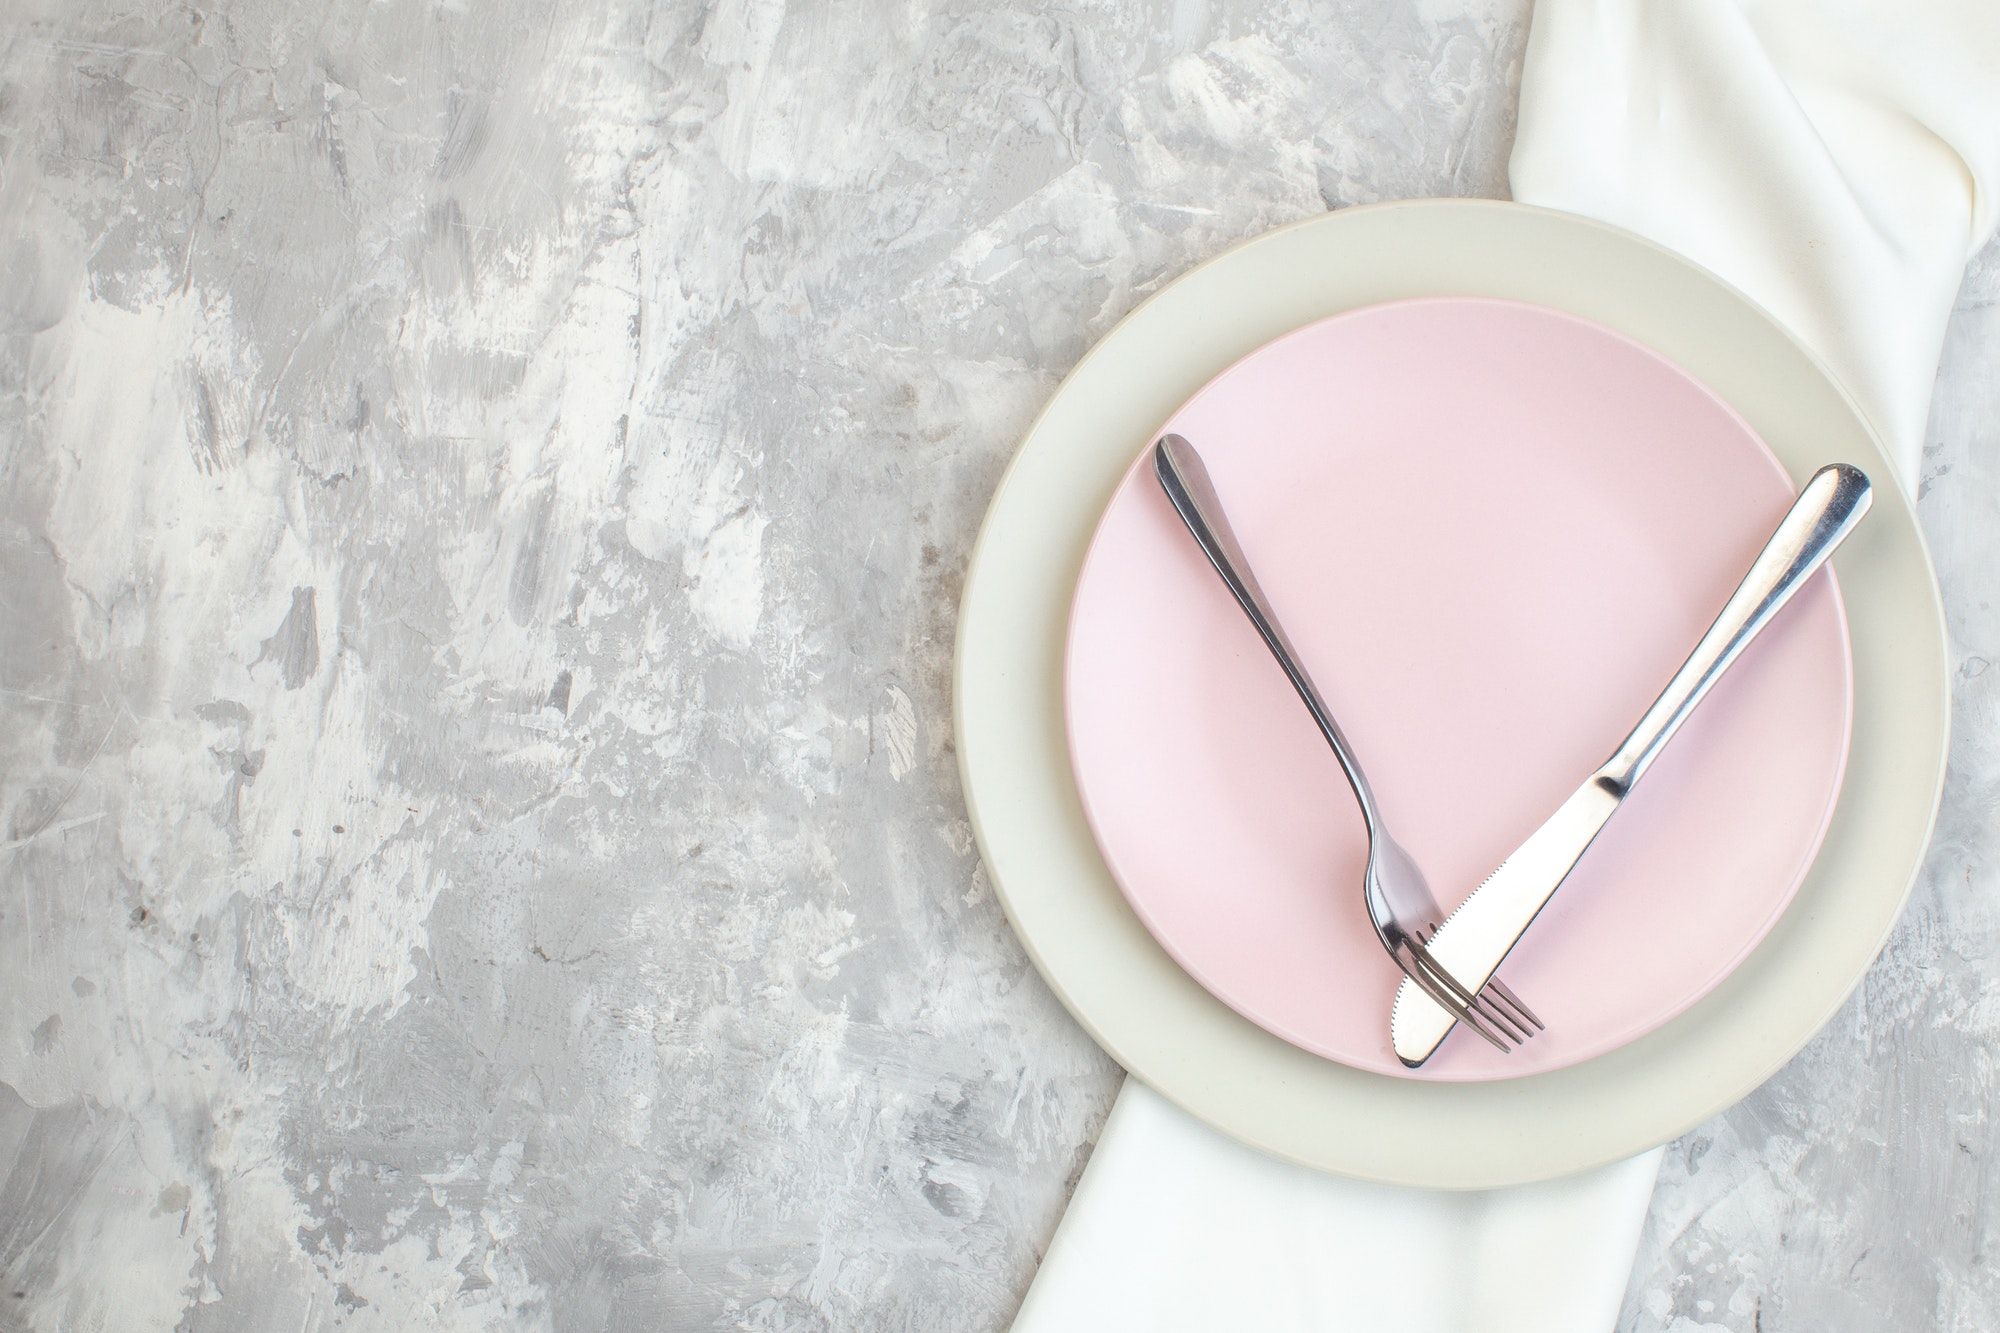 top view white plate with pink plate and cutlery on light surface kitchen glass femininity